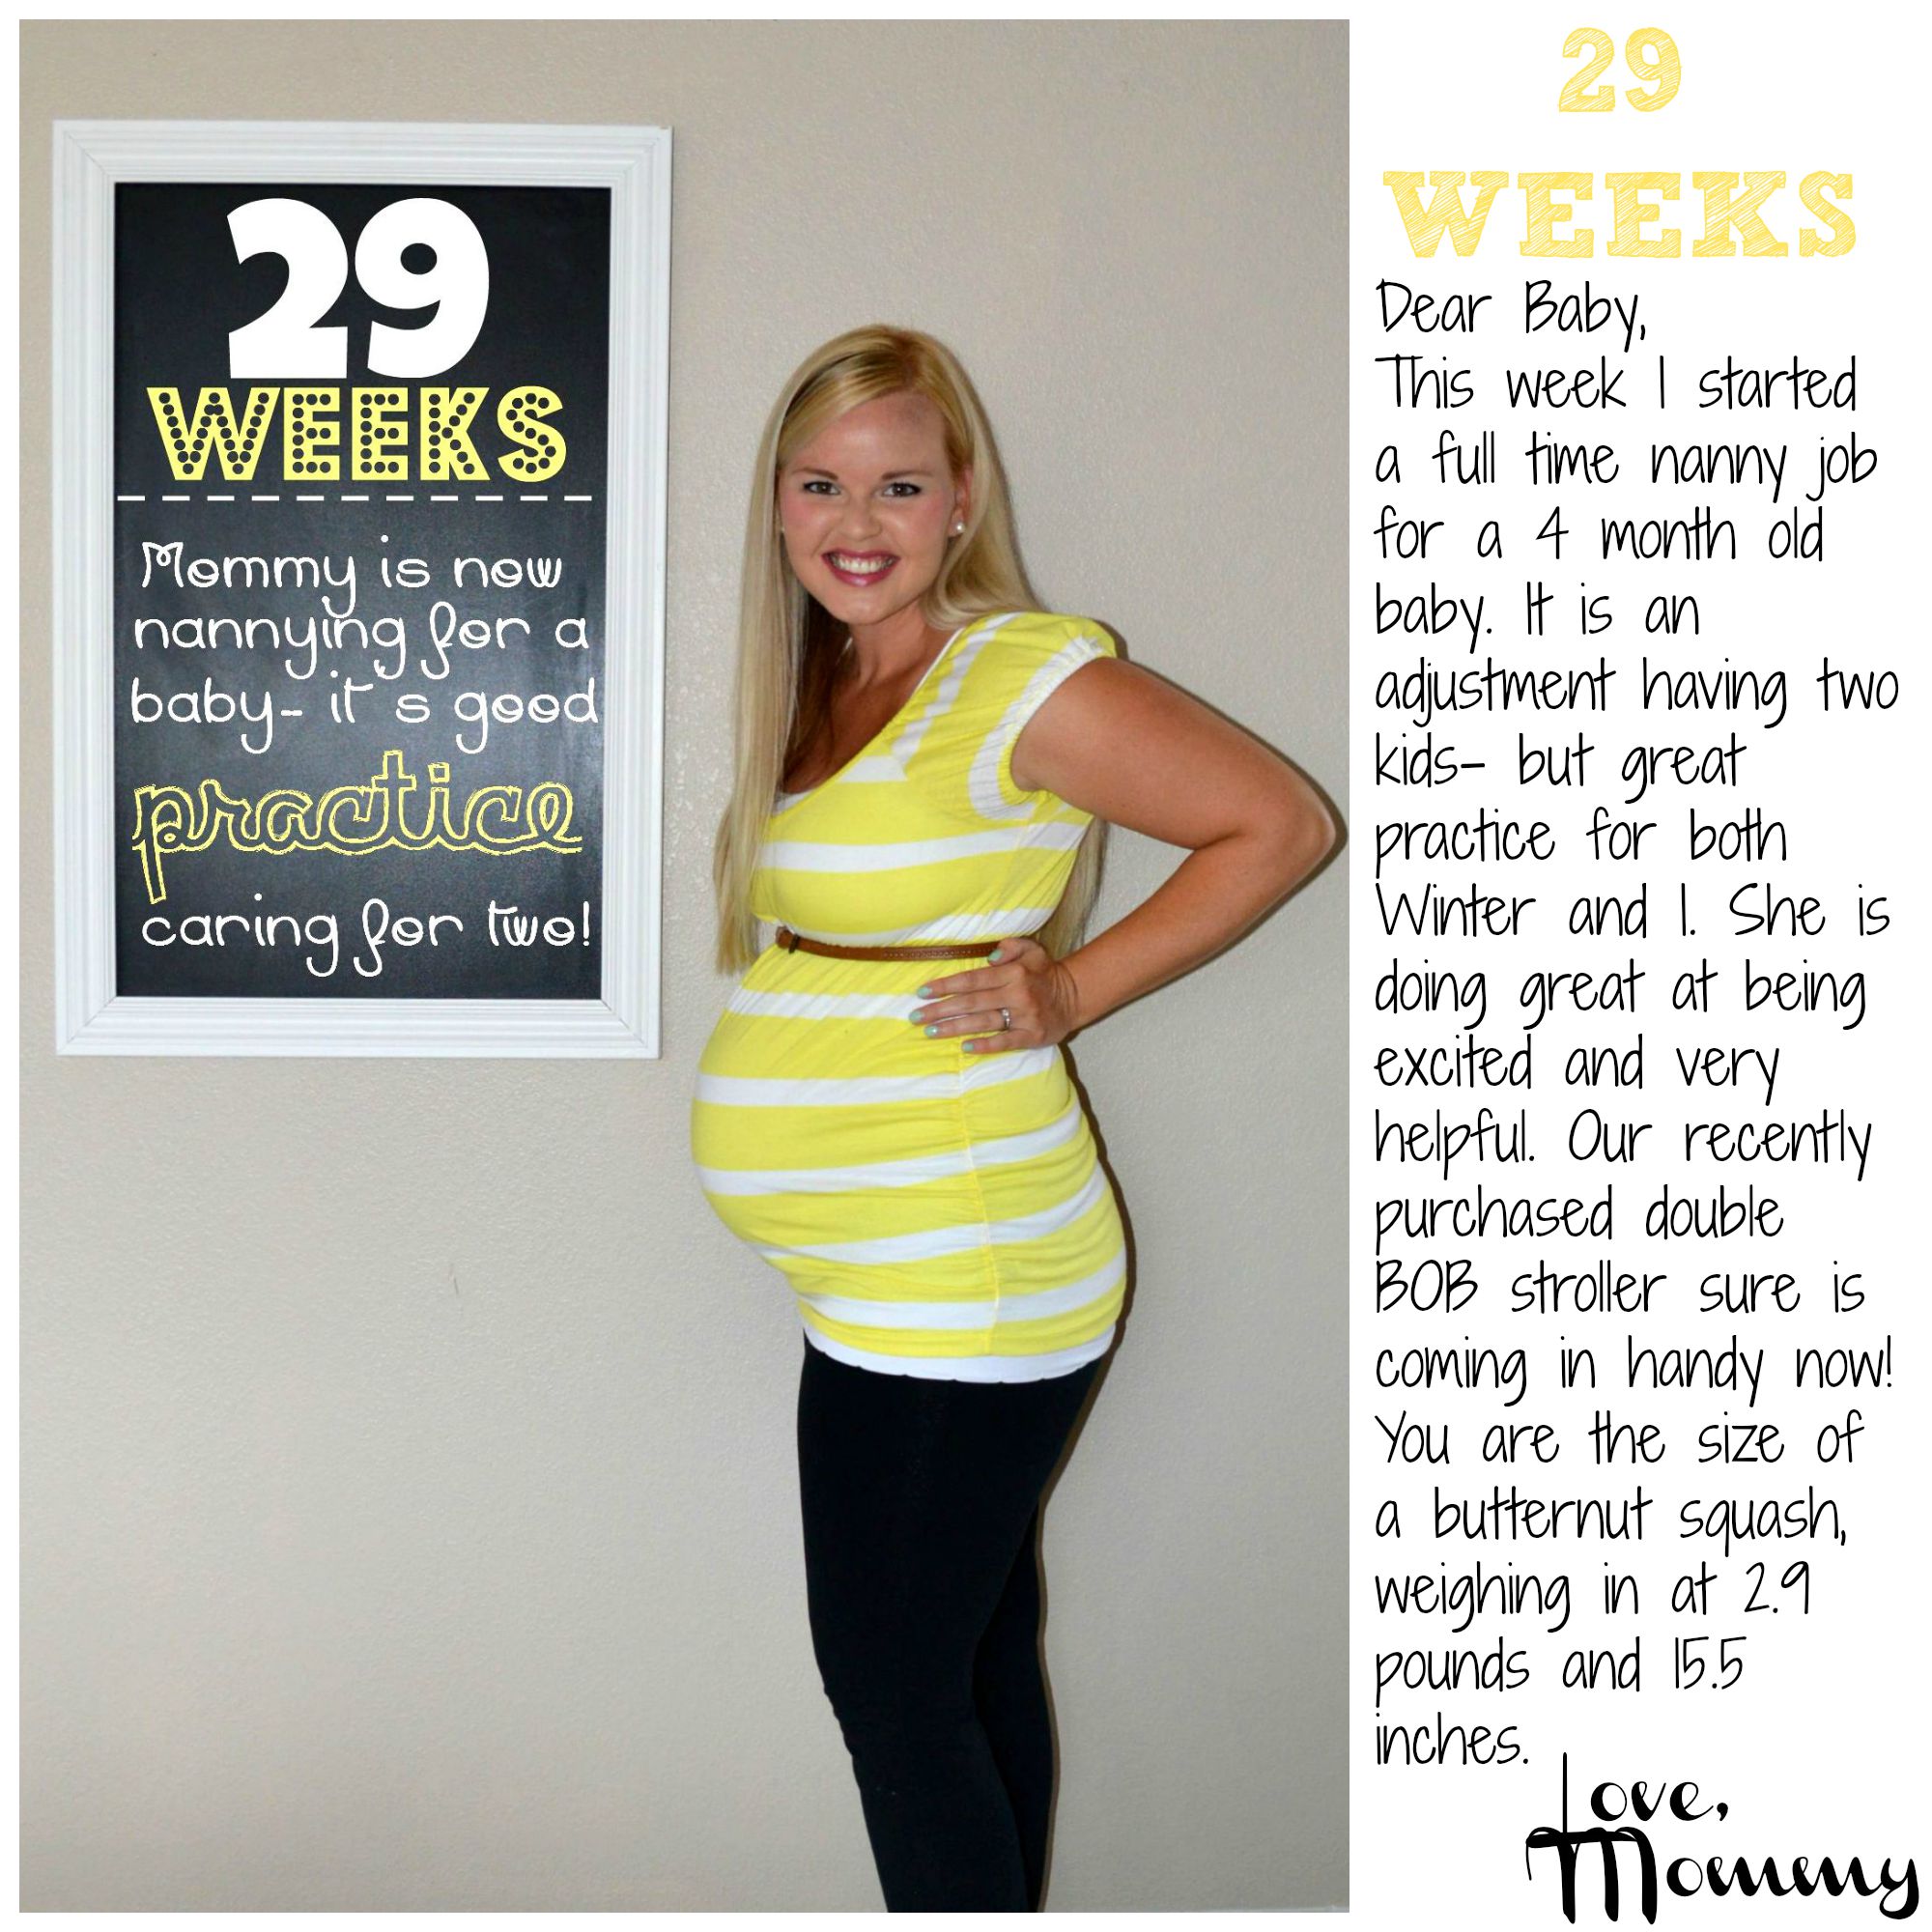 25 Weeks Pregnant: Your Bump and Feeling the Babies Hiccups